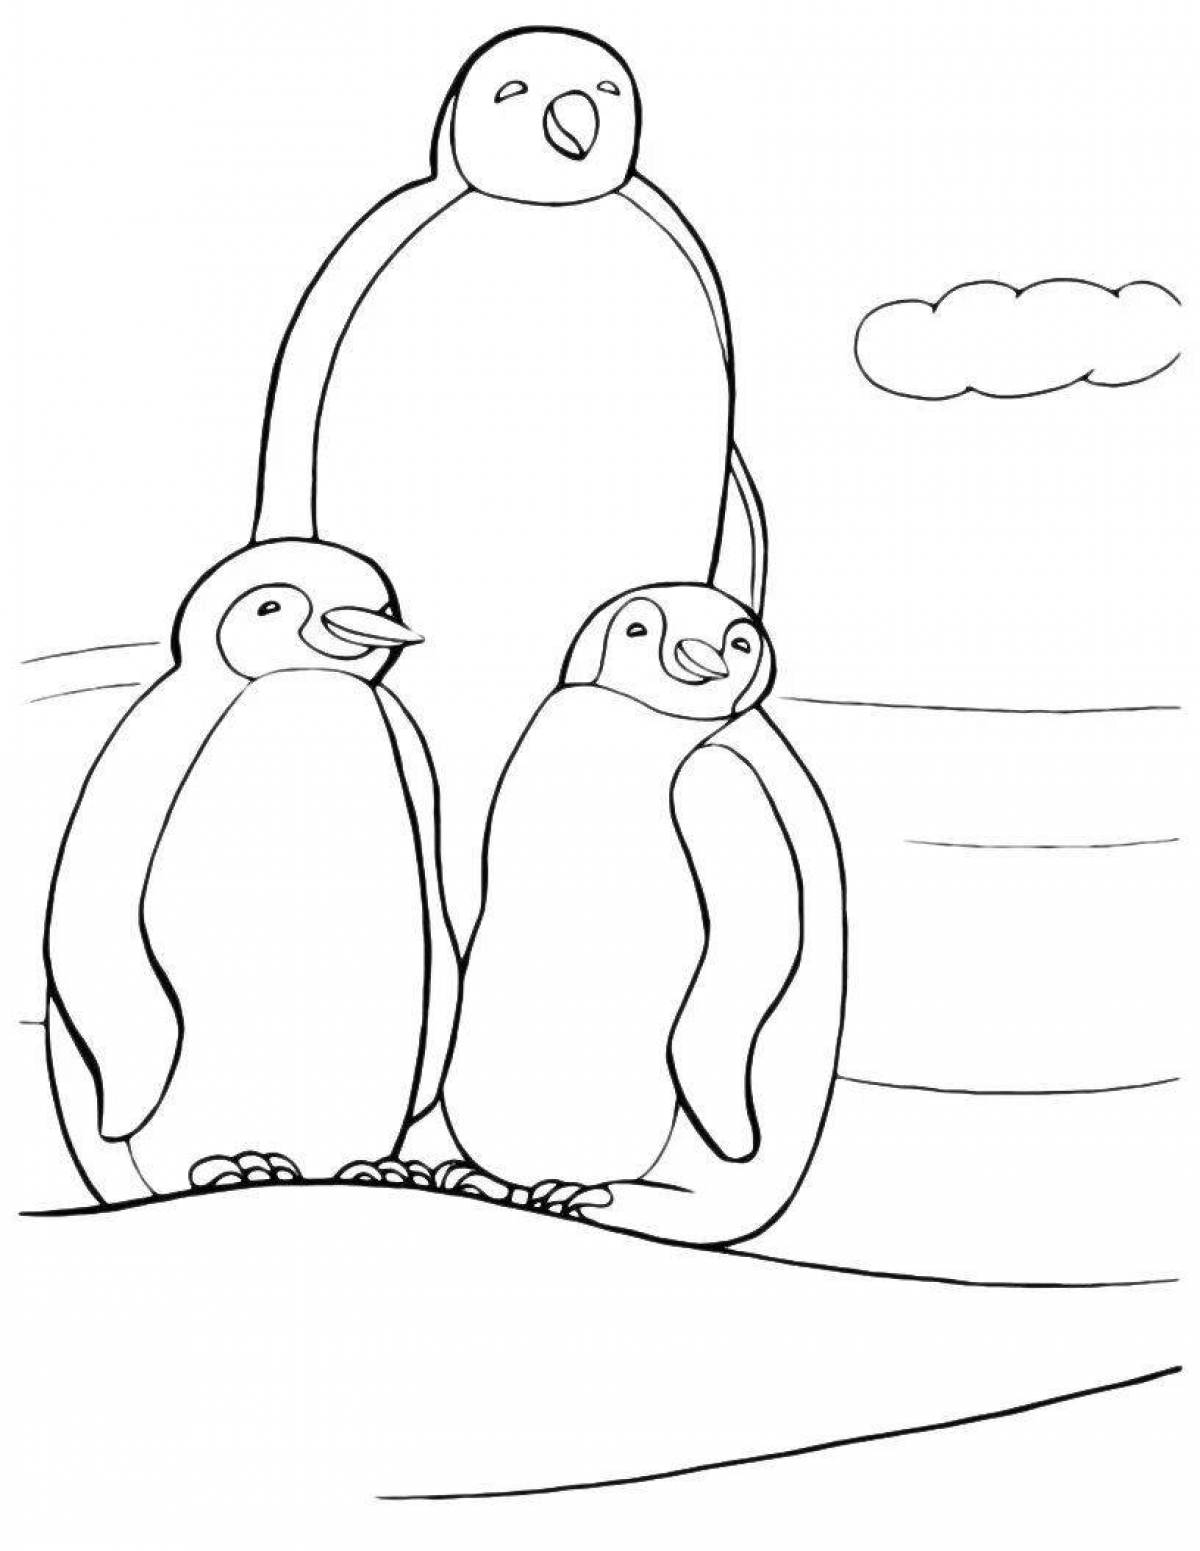 Animated penguin family coloring page